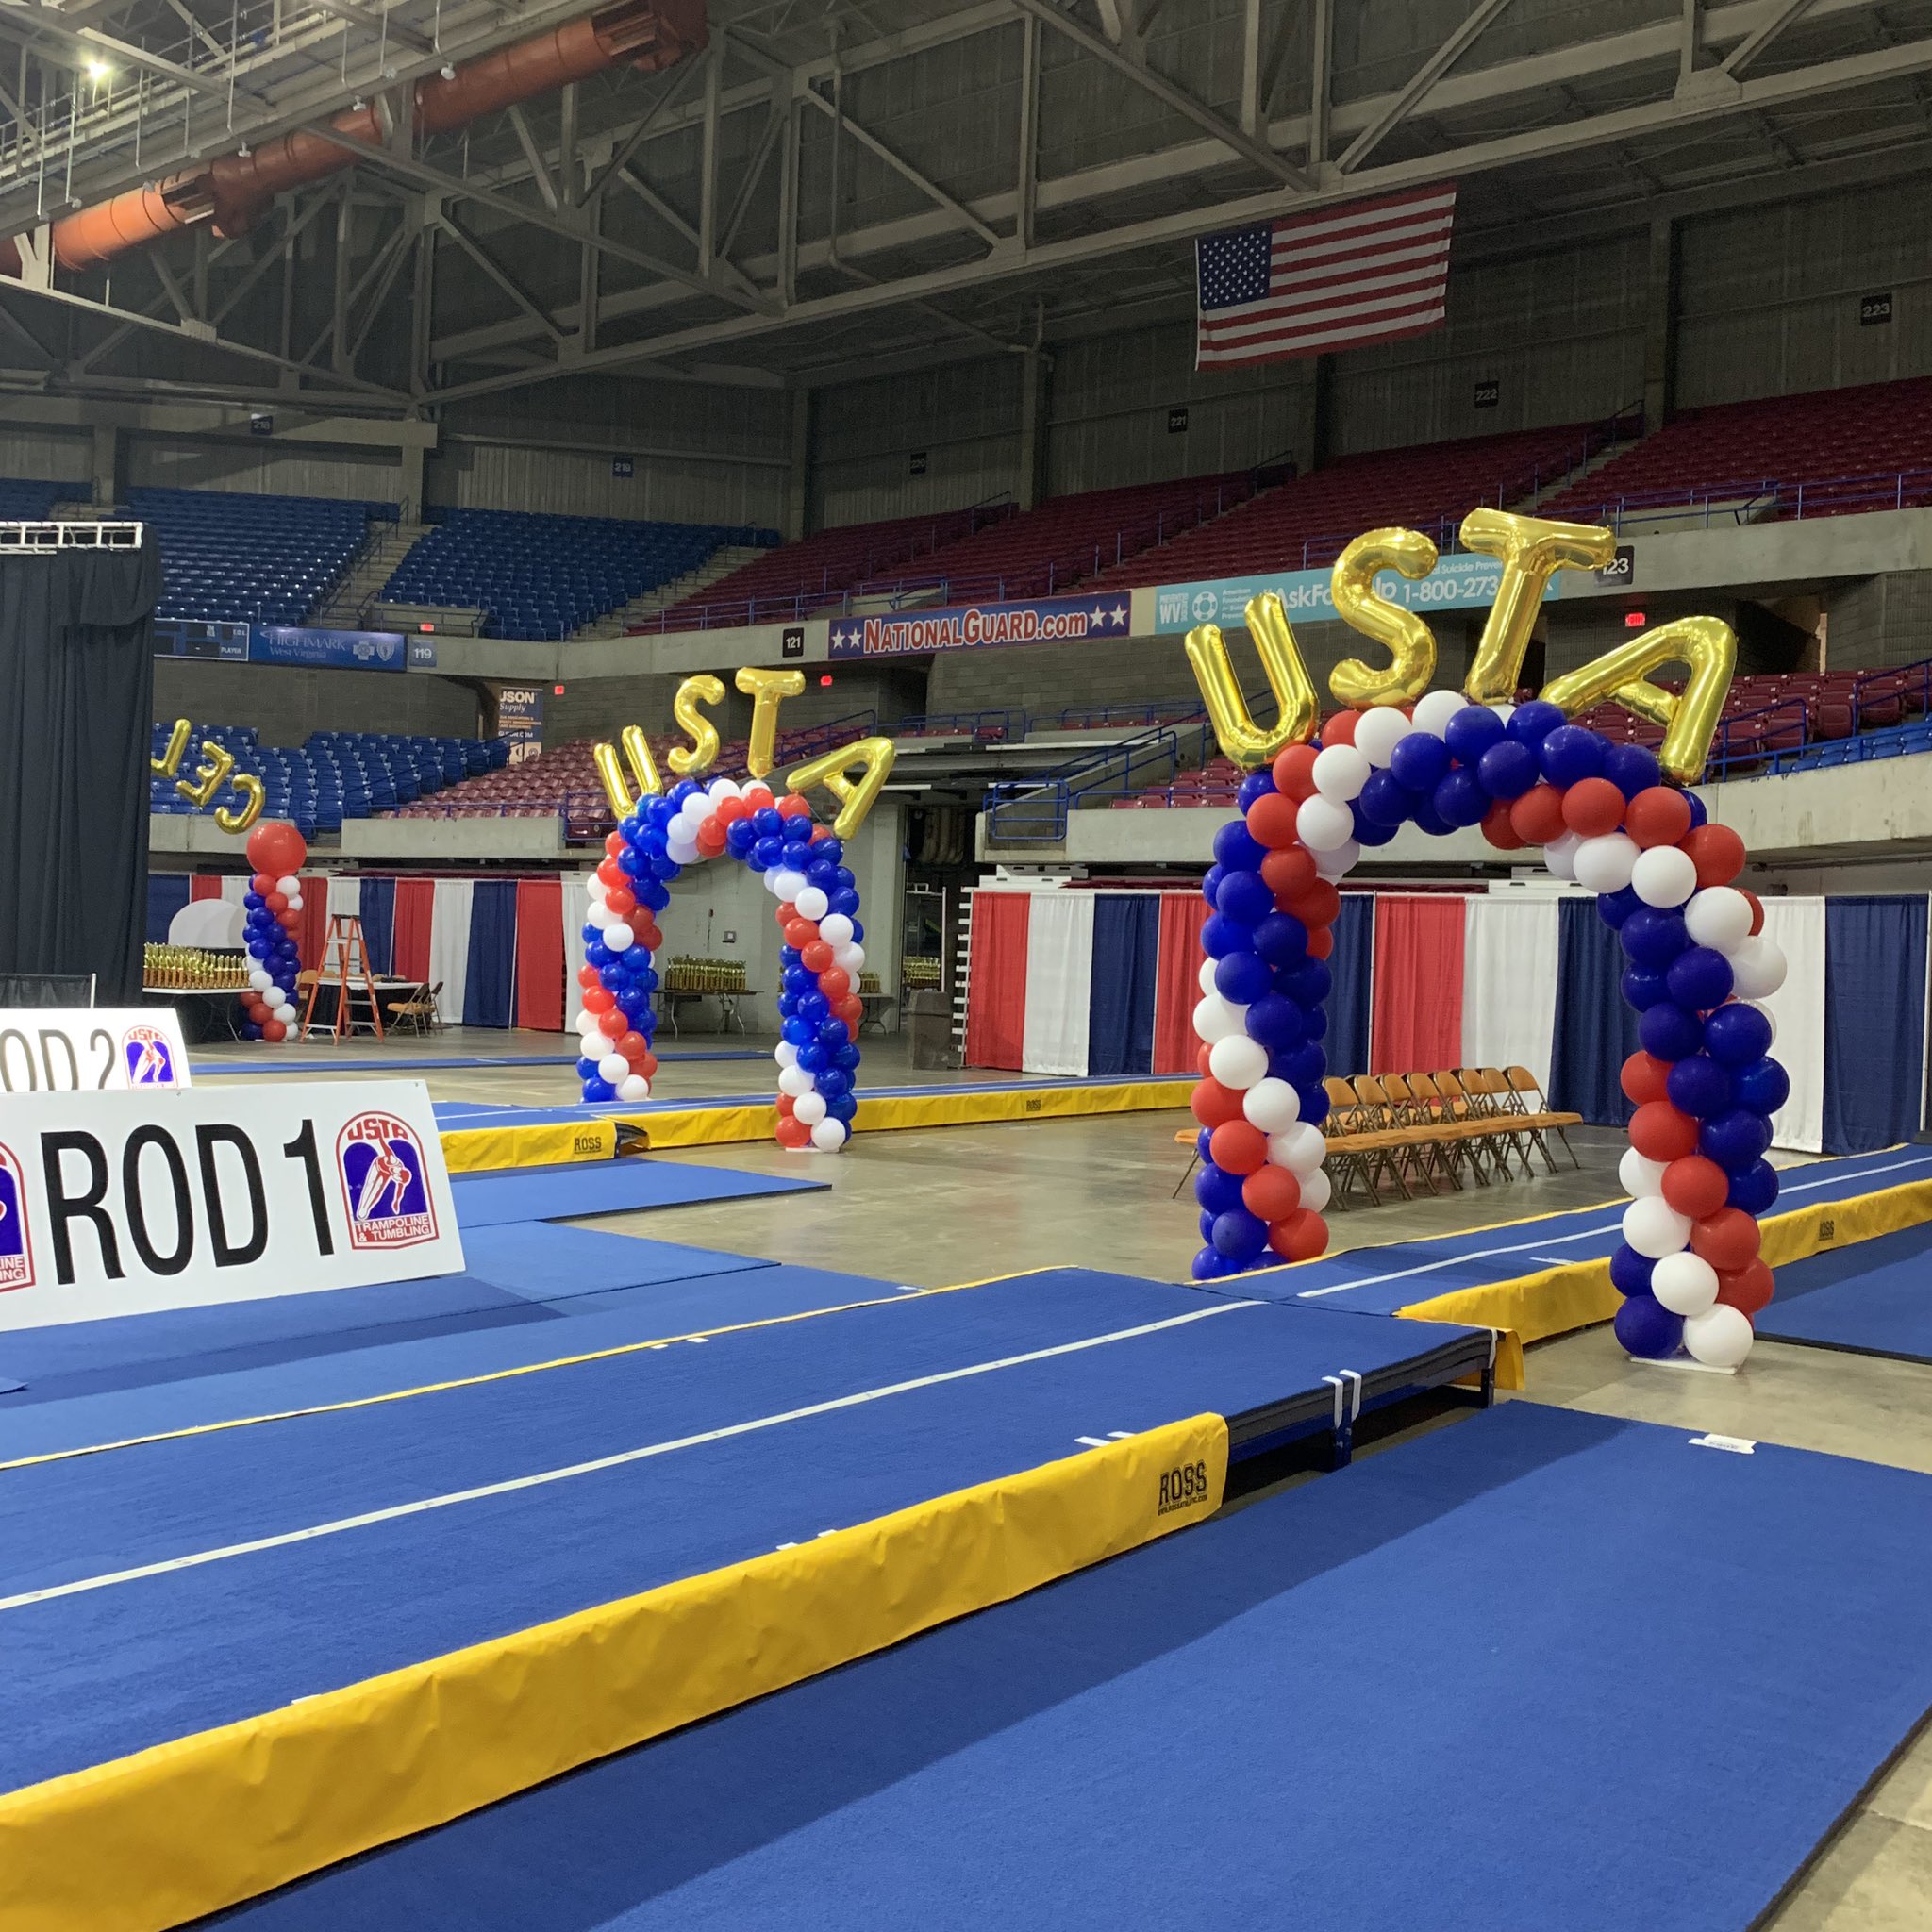 Home  United States Tumbling and Trampoline Association